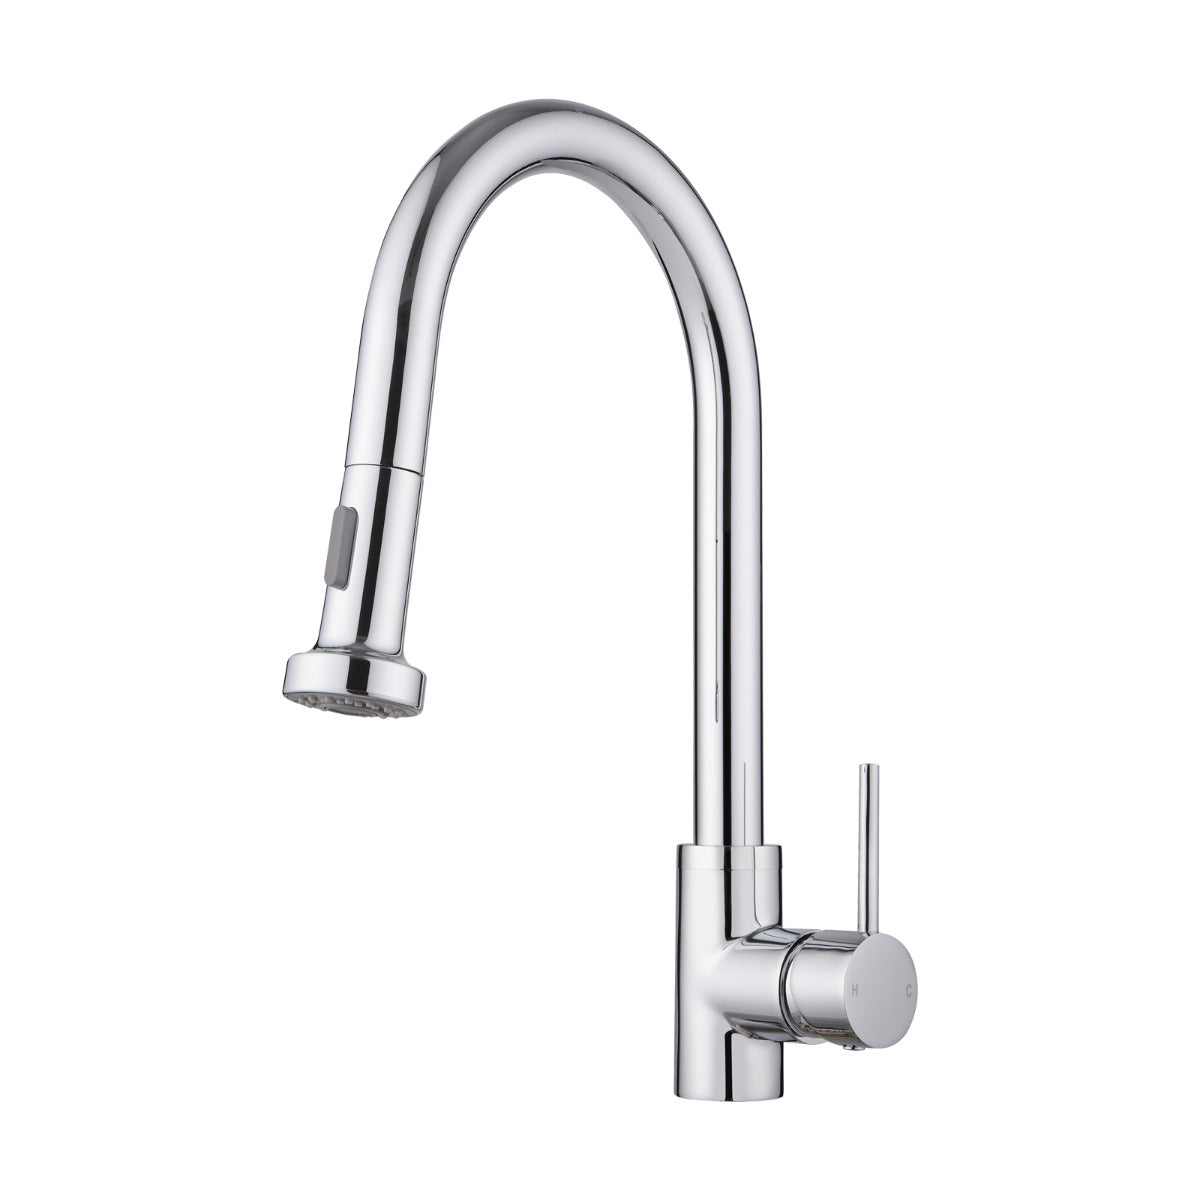 JassferryJASSFERRY Kitchen Sink Mixer Tap Pull Down Sprayer Pull Out Single Lever FaucetKitchen taps